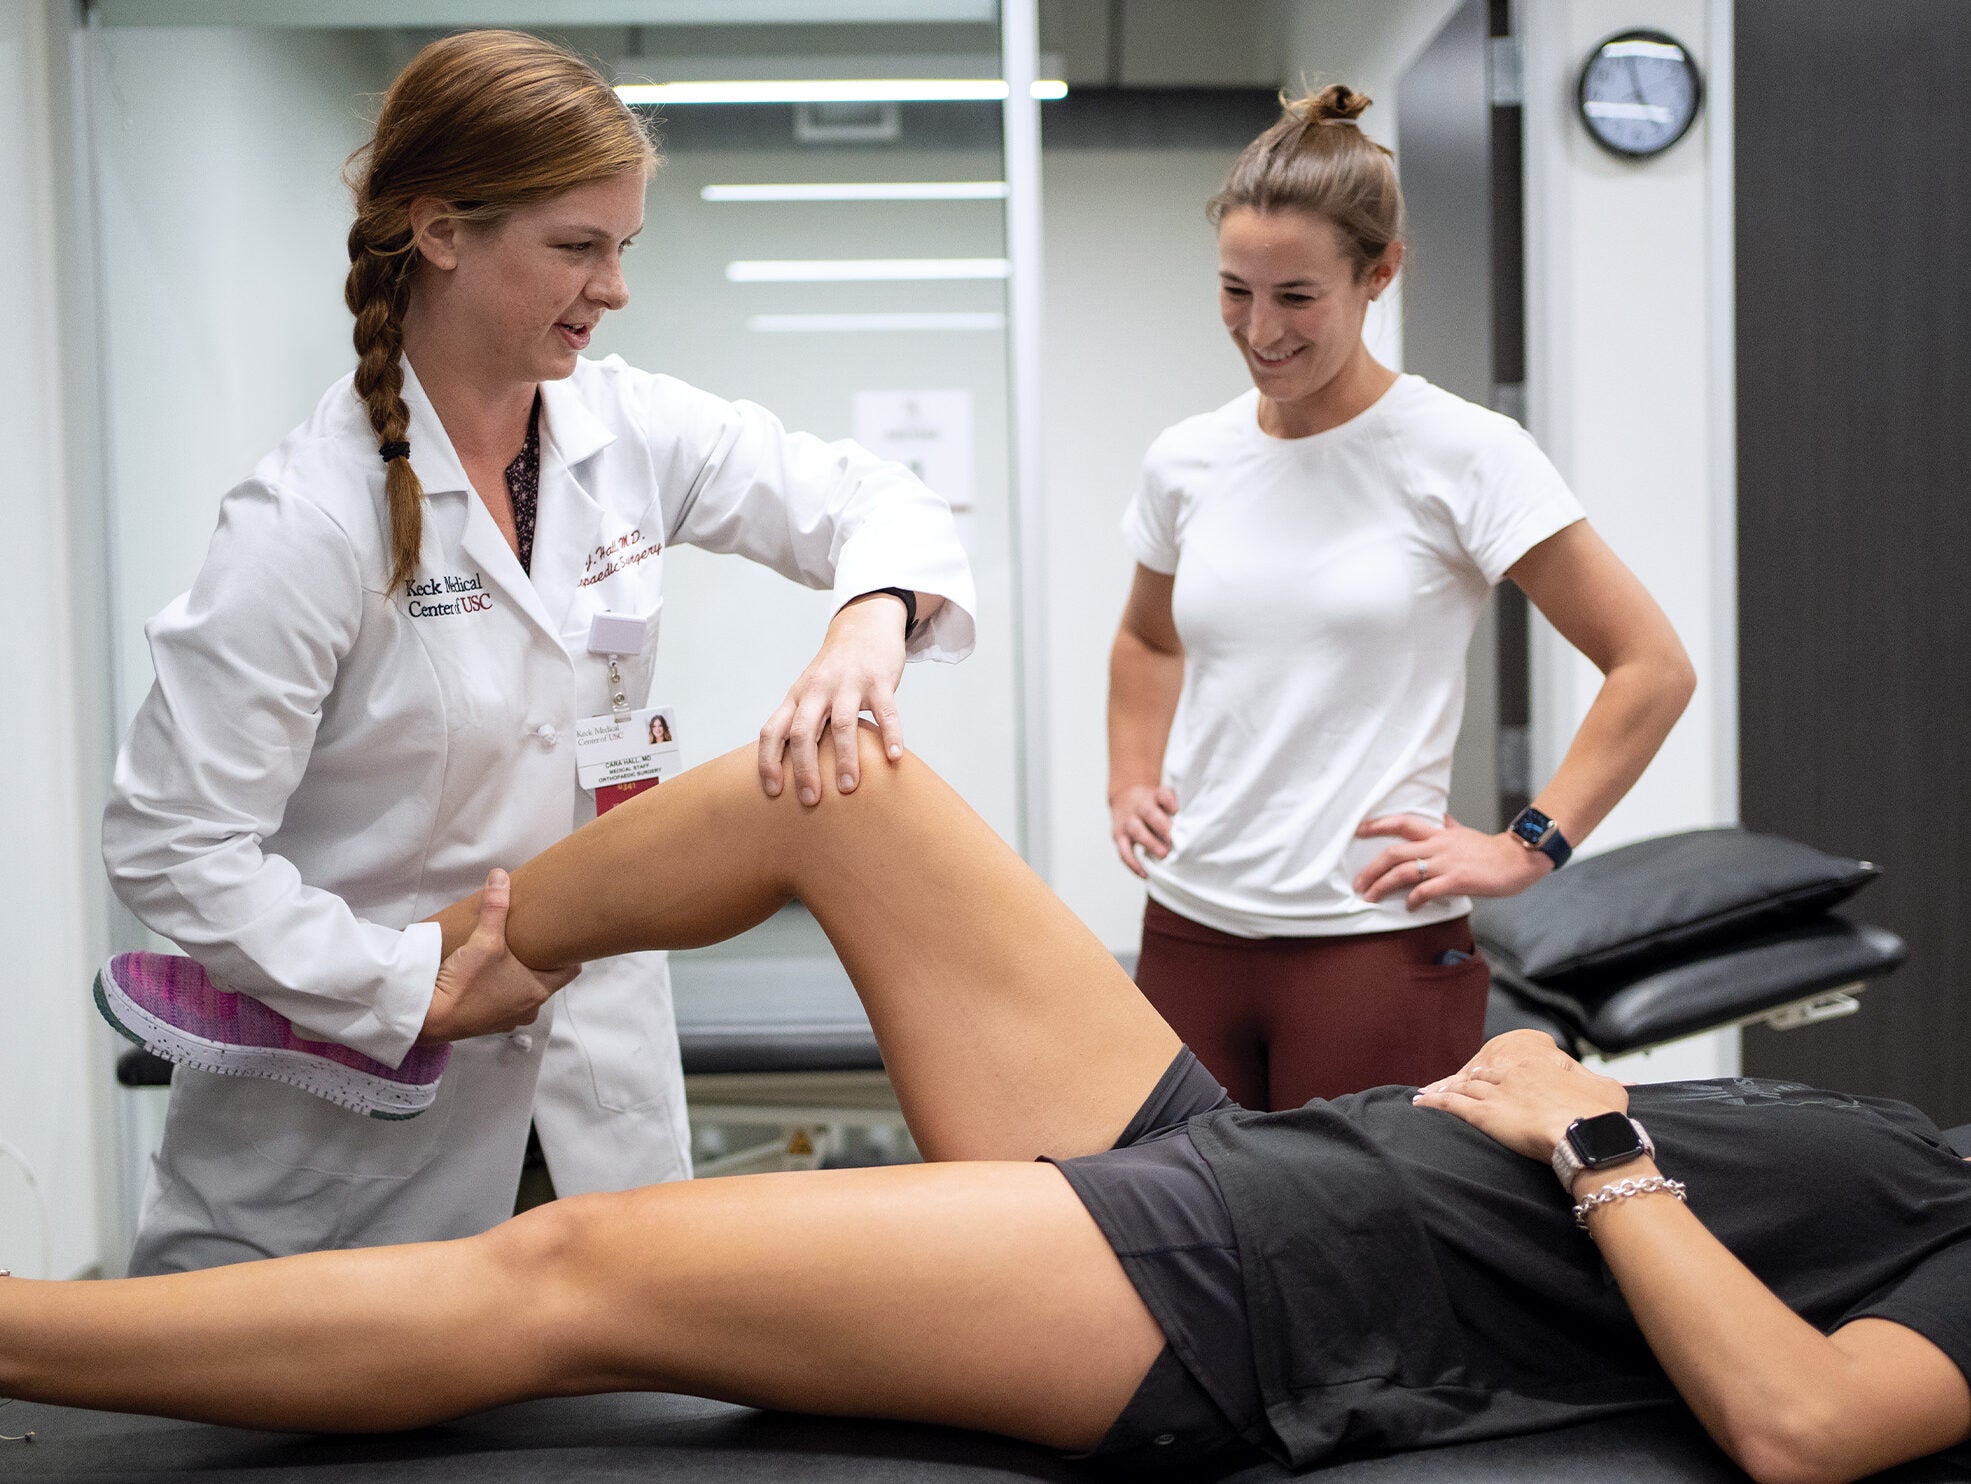 Dr. Cara Hall holding and putting pressure on the knee of an athlete